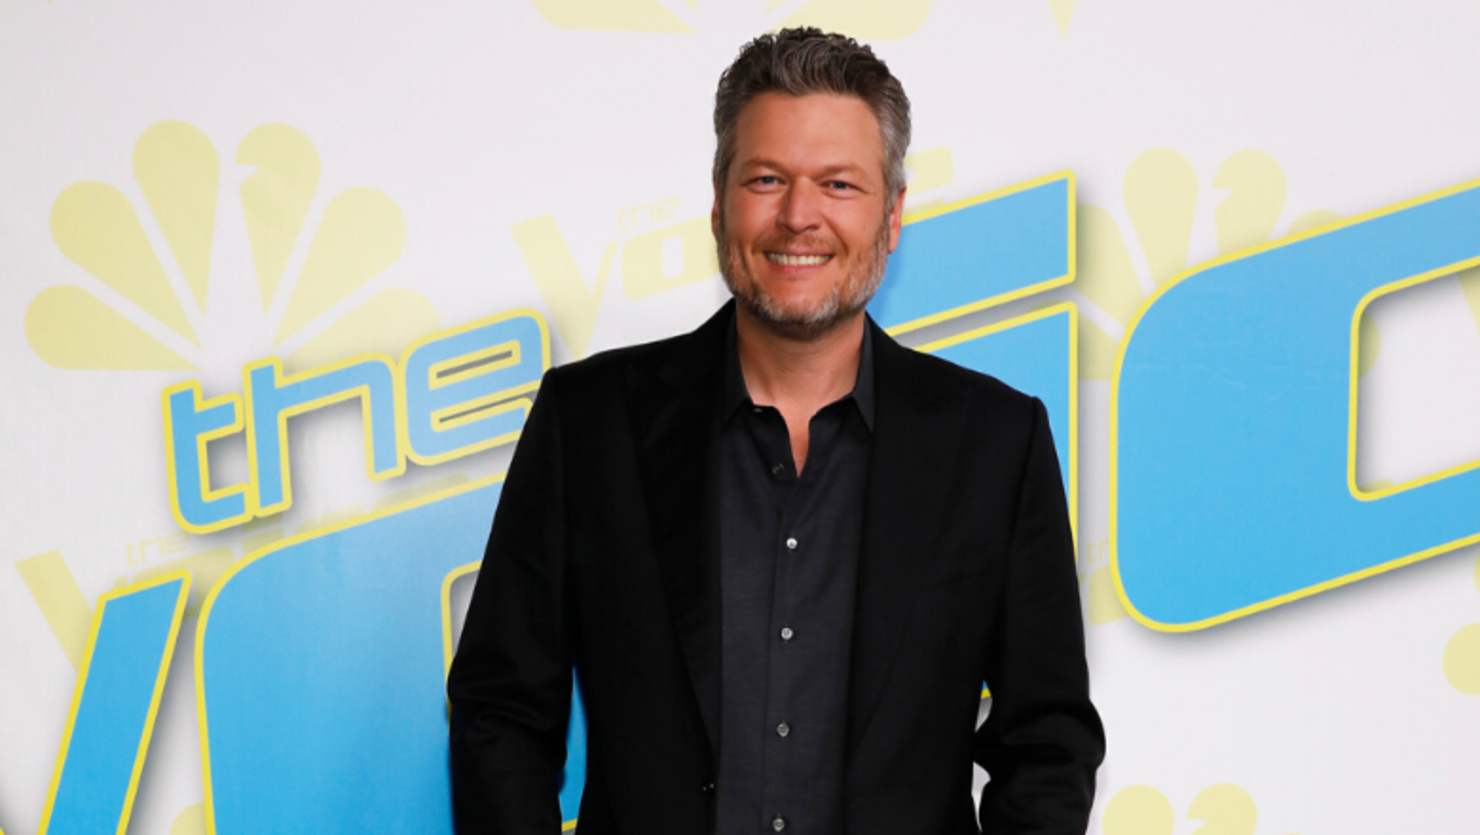 Blake Shelton Helps Grant Wish For 7-Year-Old Fan With Cerebral Palsy